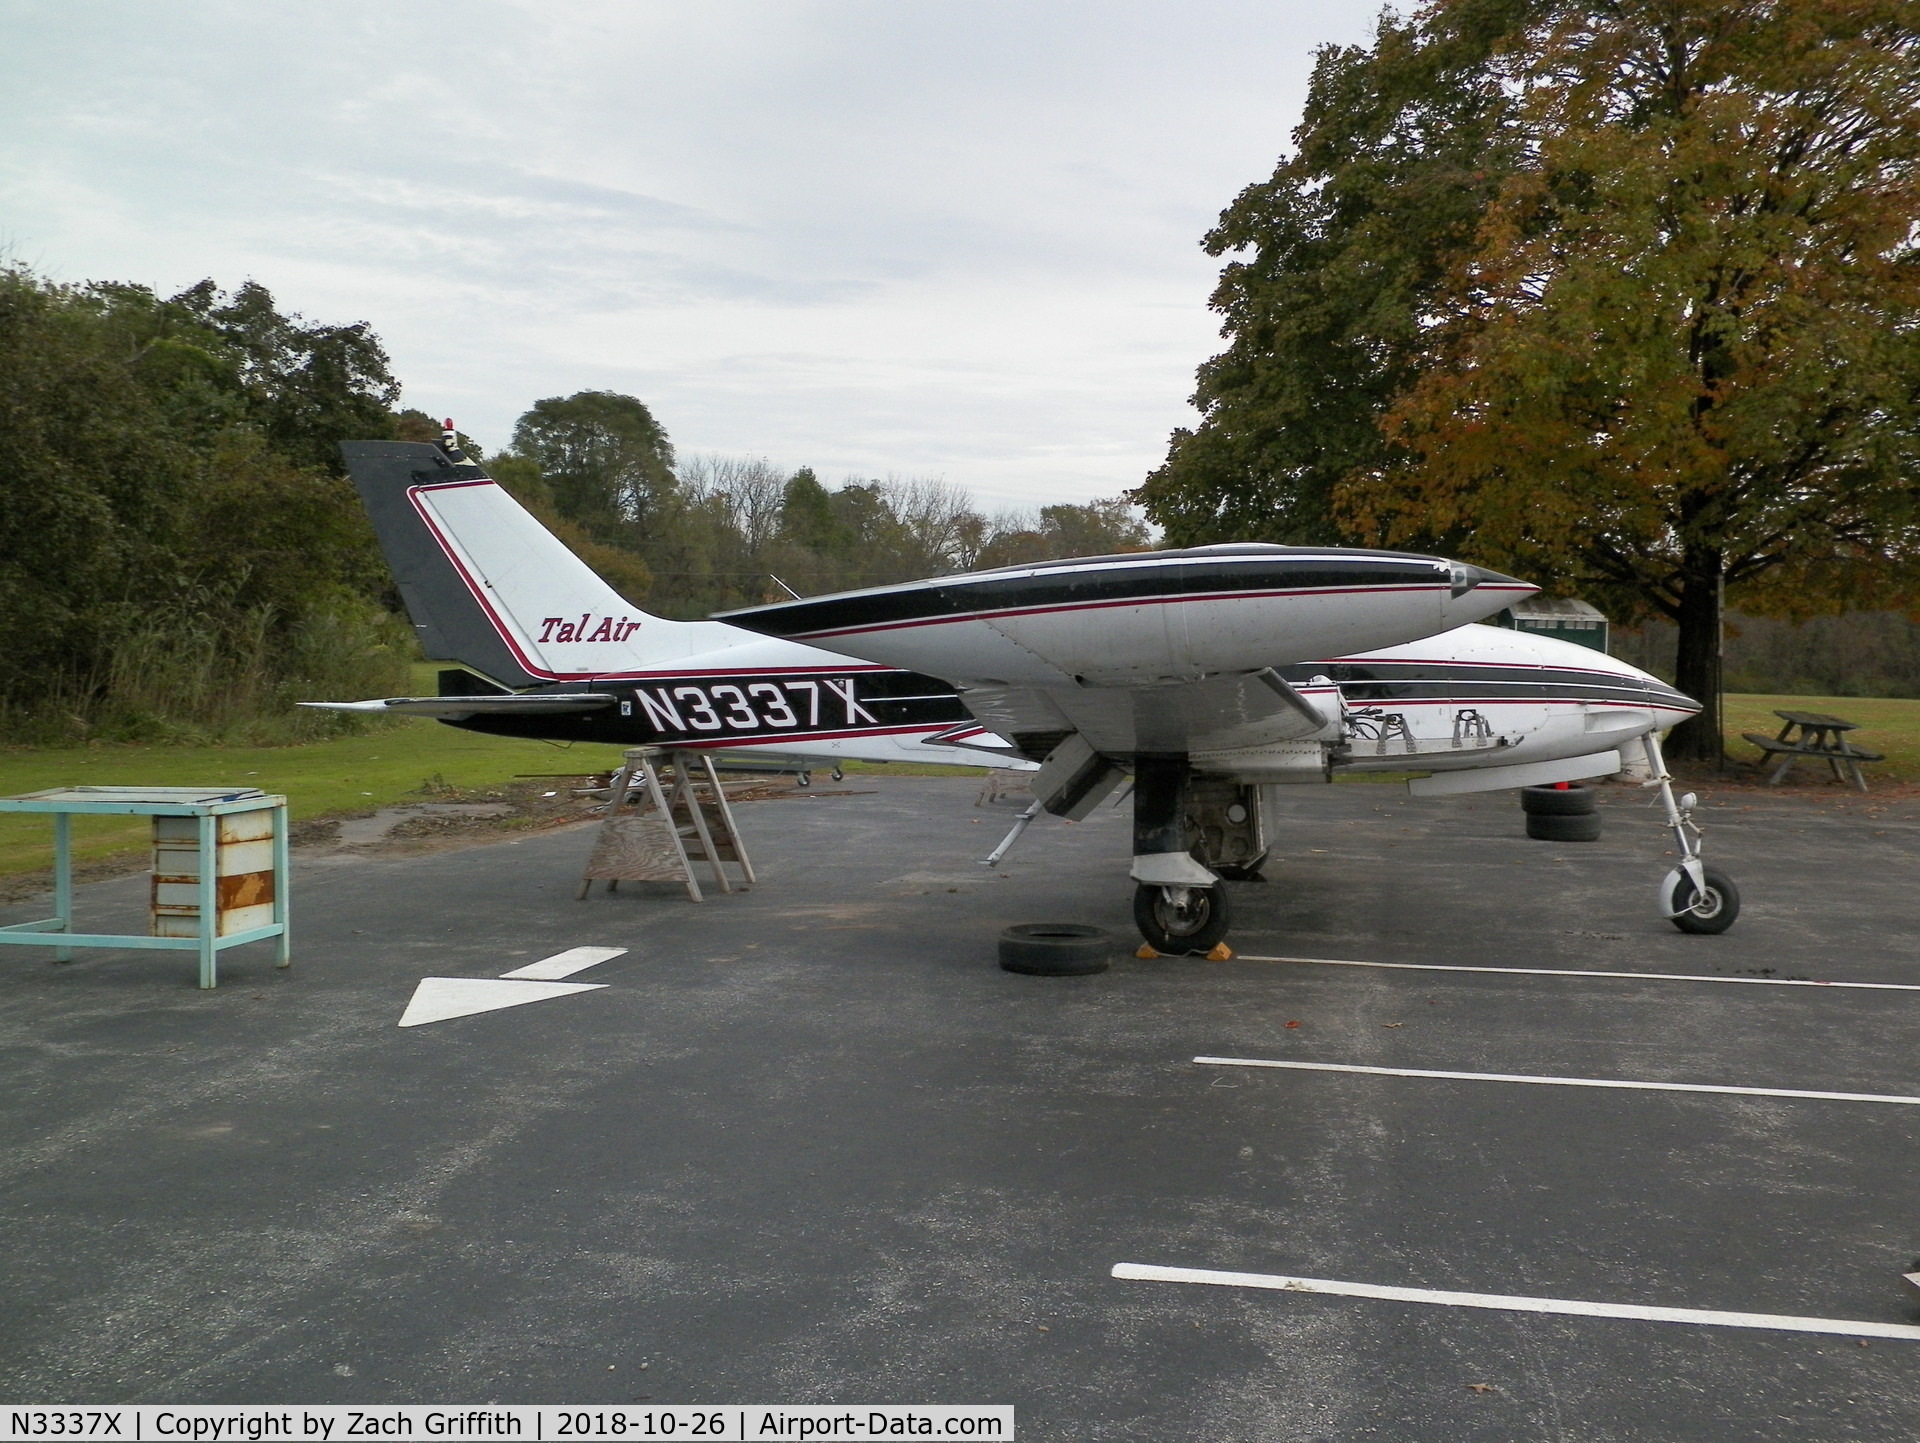 N3337X, 1967 Cessna 310L C/N 310L-0187, Currently located at a small technical high school near Phoenixville, PA